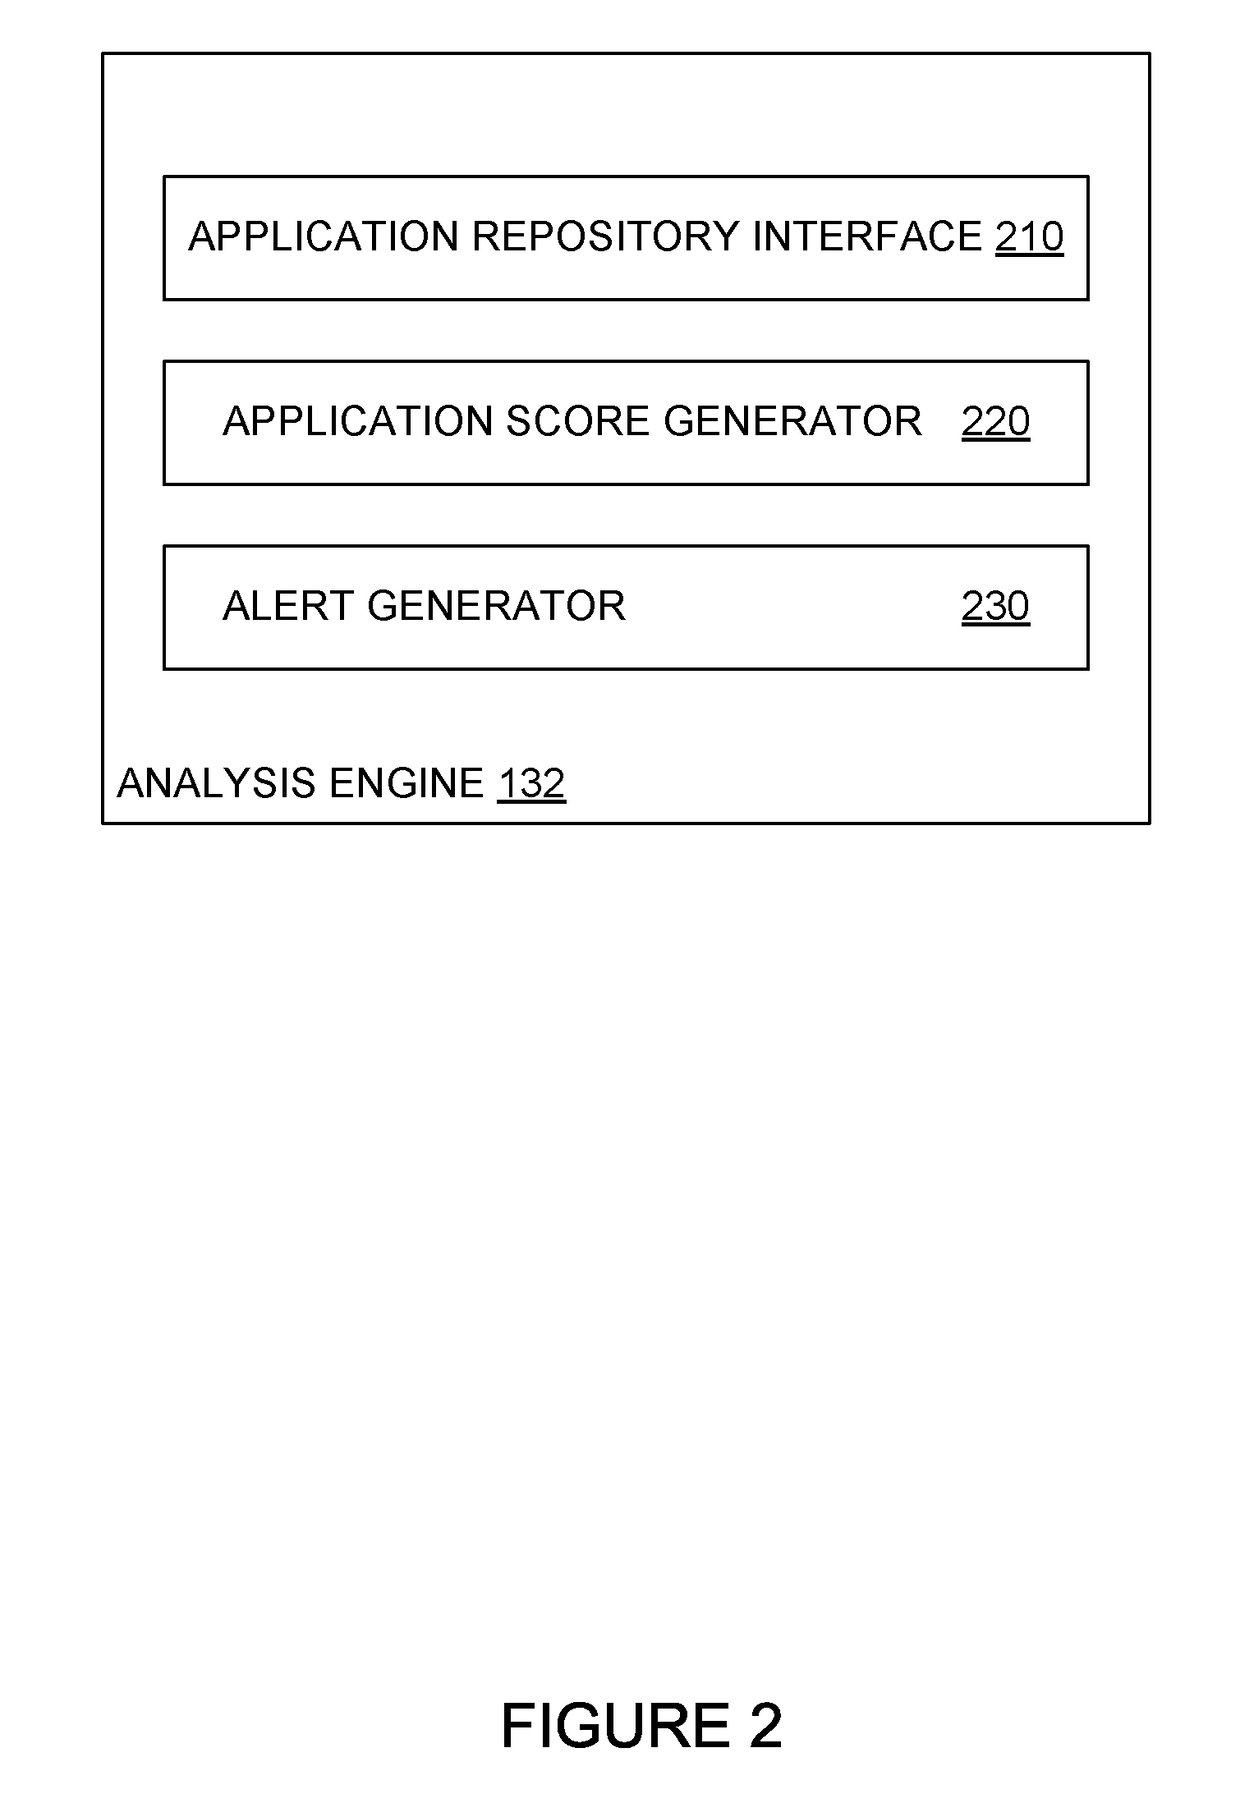 Determining application reputation based on deviations in security rating scores